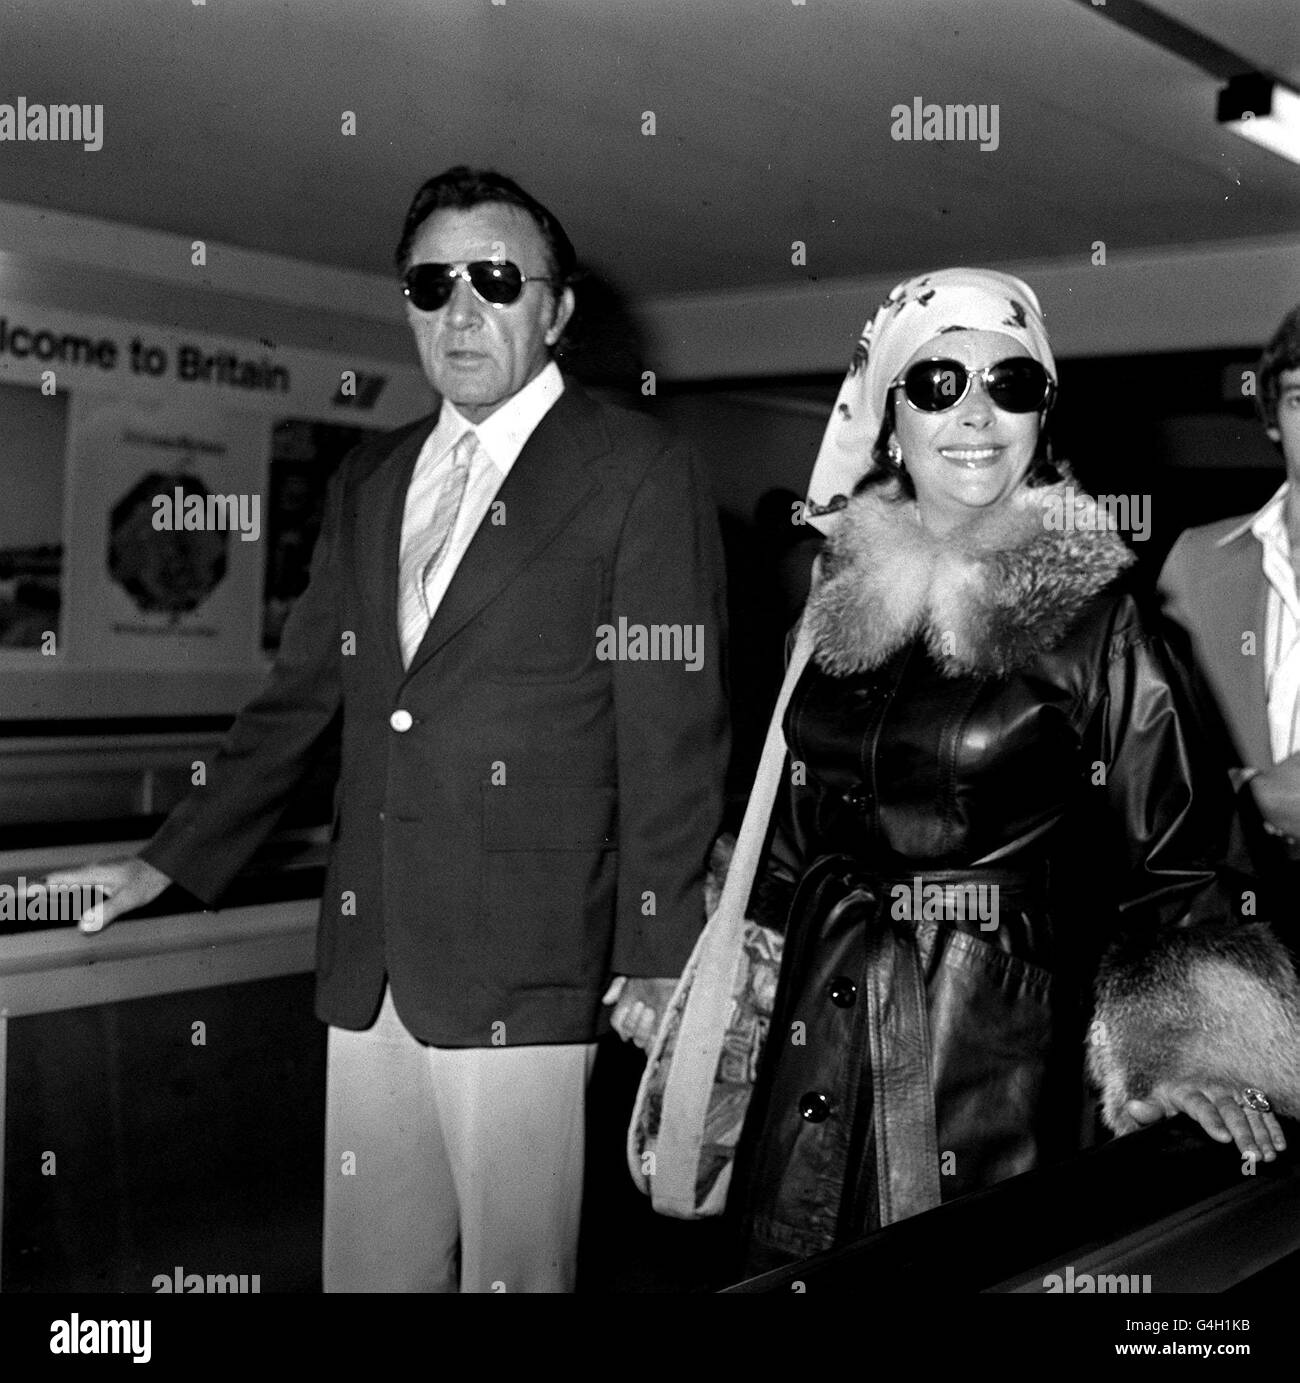 PA NEWS PHOTO 10/11/75 A LIBRARY FILE PICTURE OF RICHARD BURTON AND WIFE ELIZABETH TAYLOR ARRIVING AT LONDON'S HEATHROW AIRPORT FROM JOHANNESBURG Stock Photo